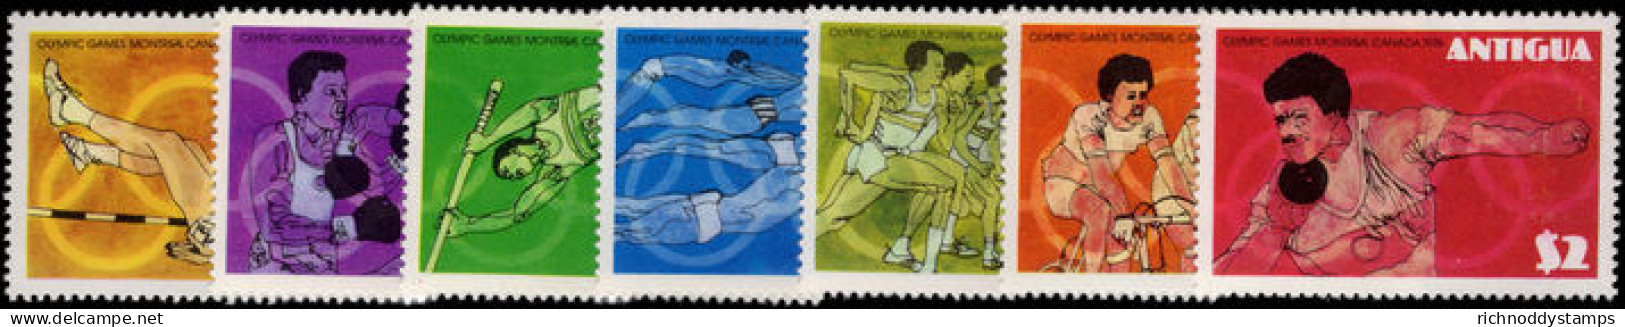 Antigua 1976 Olympics Unmounted Mint. - 1960-1981 Ministerial Government